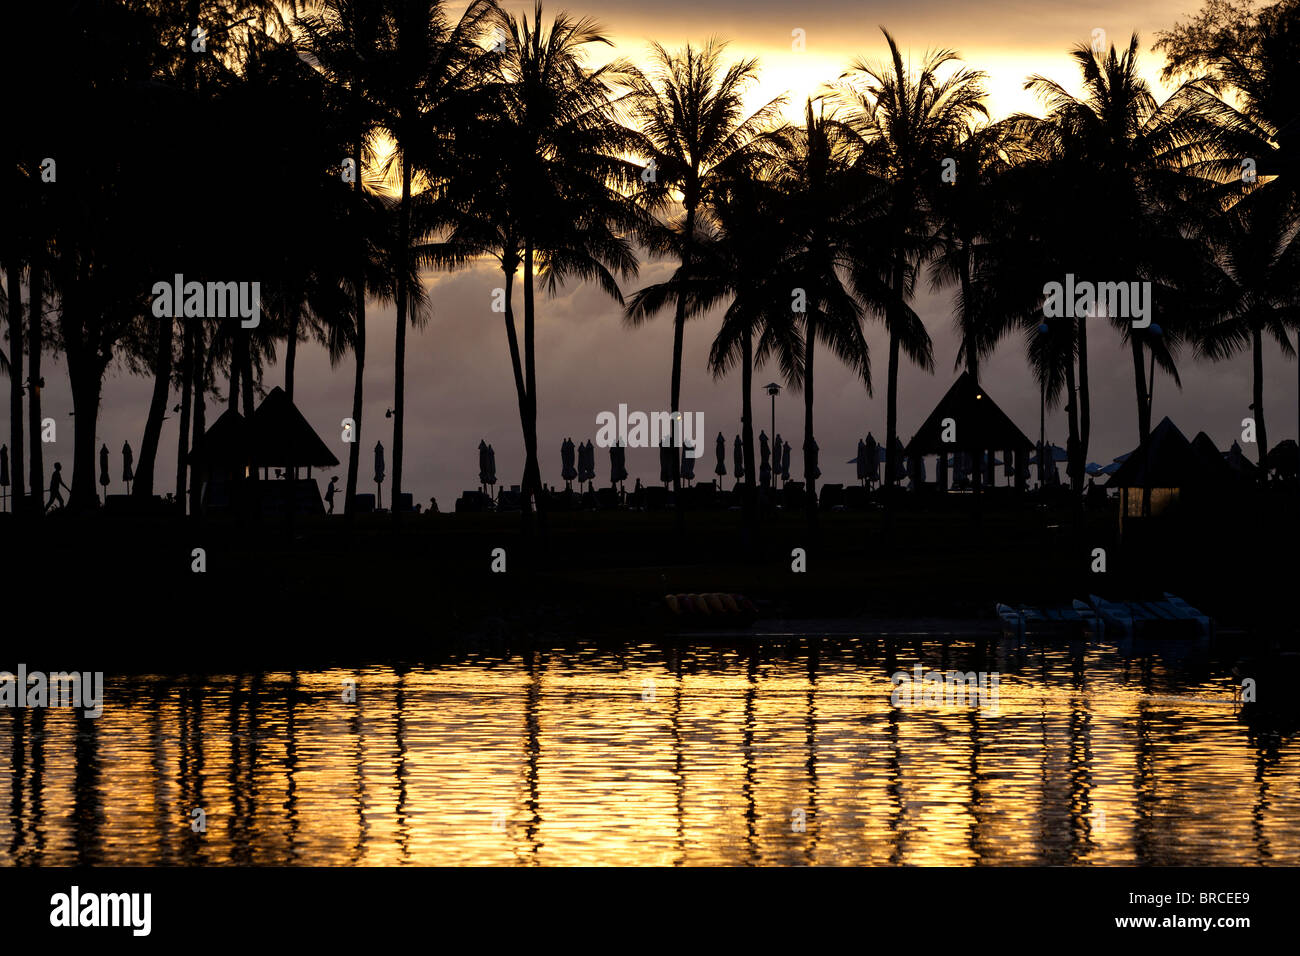 Palm tree silhouettes at sunset in Thailand Stock Photo